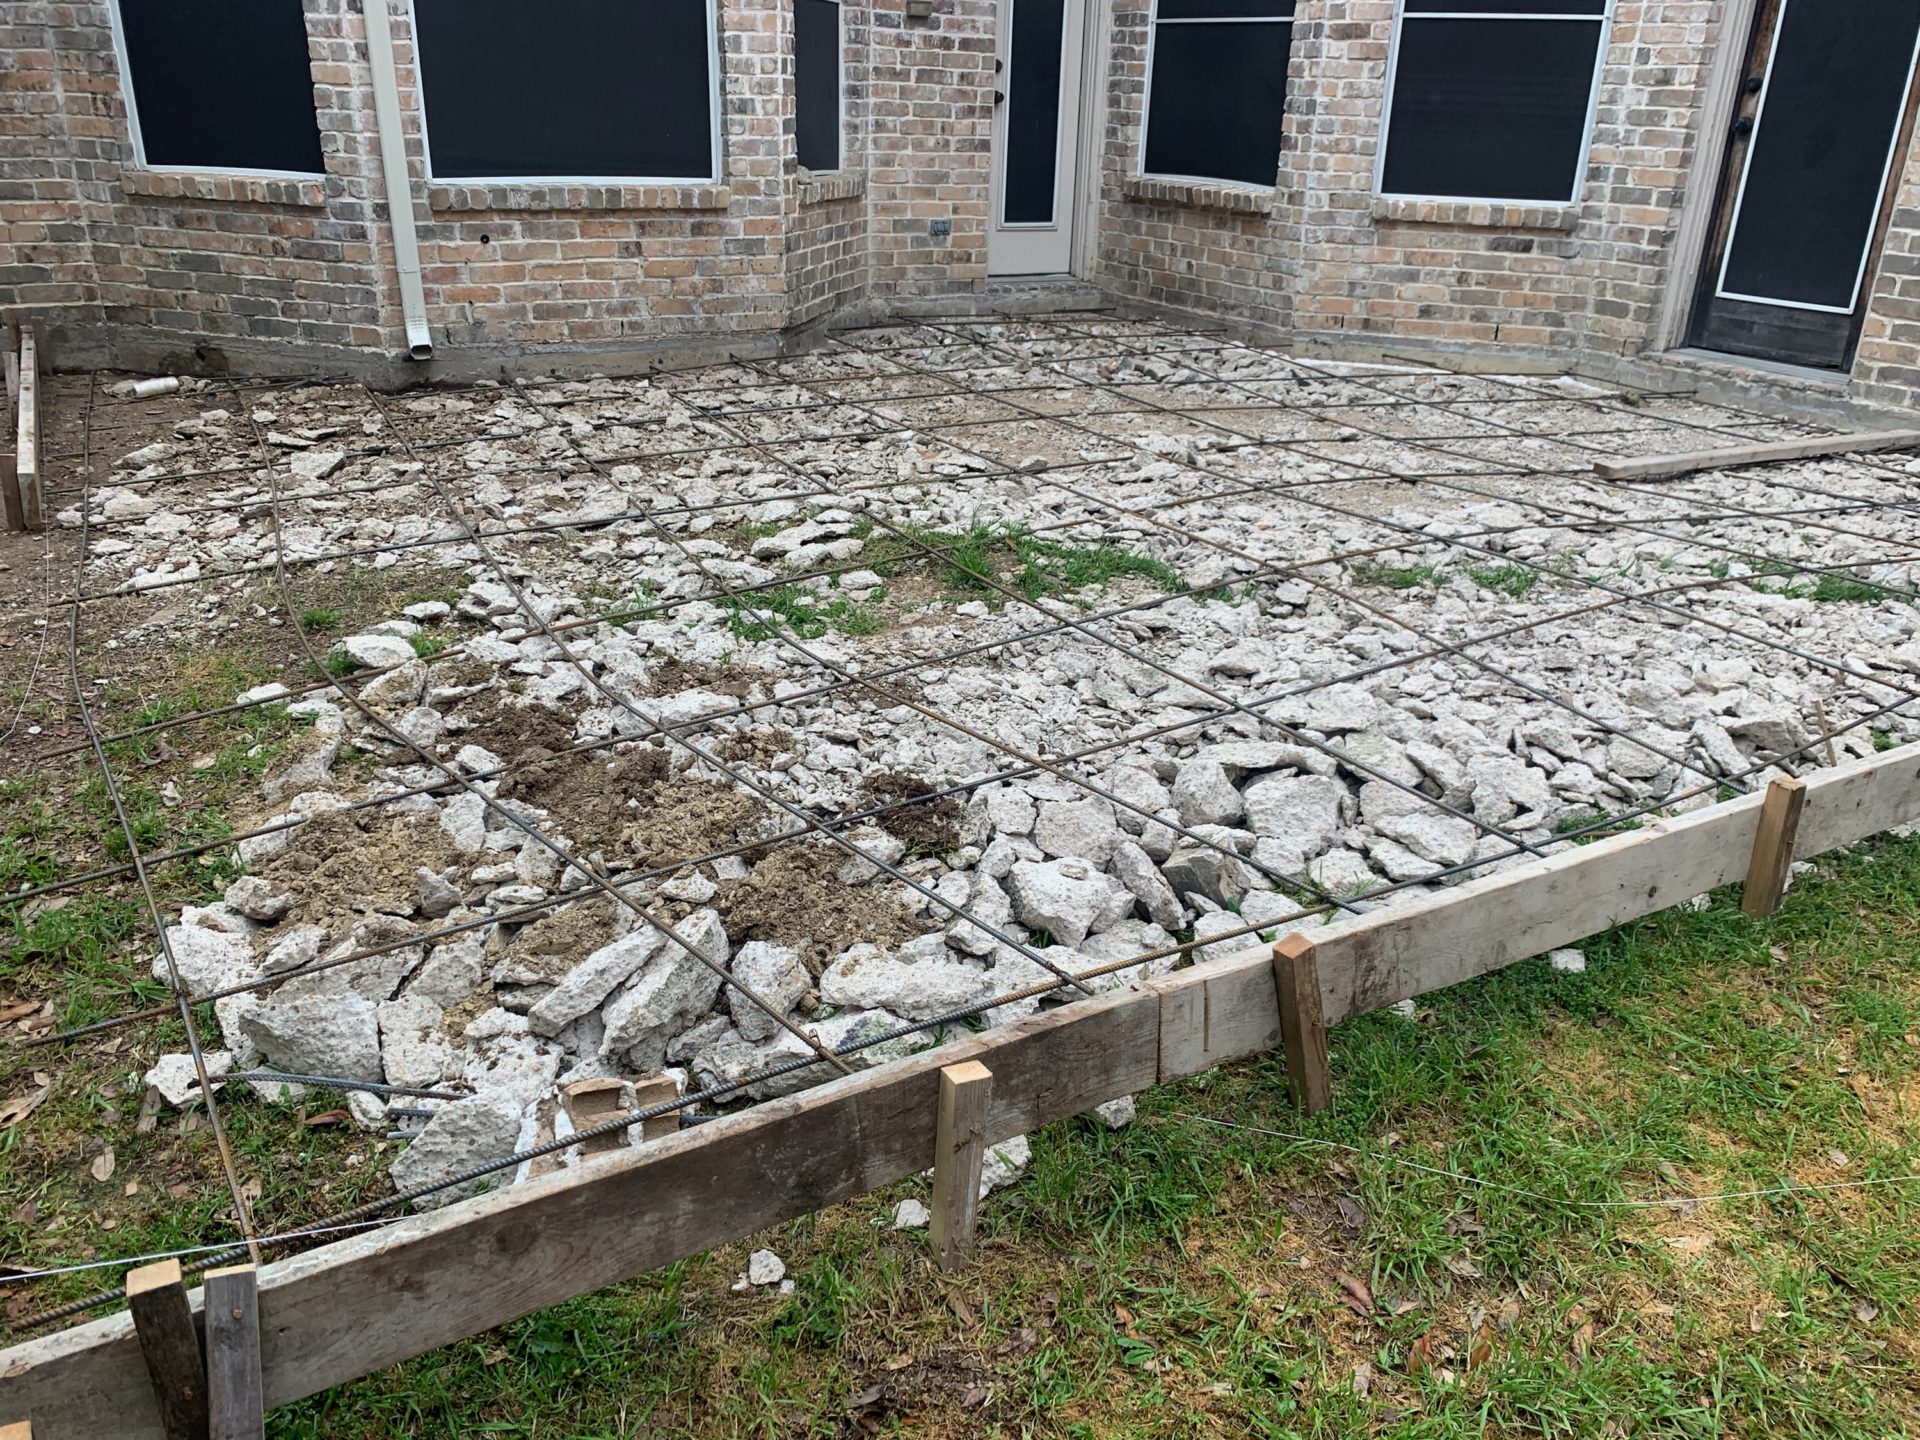 Foundation for patio concrete slab before concrete is laid for home in Dallas Fort Worth Texas patio construction job.